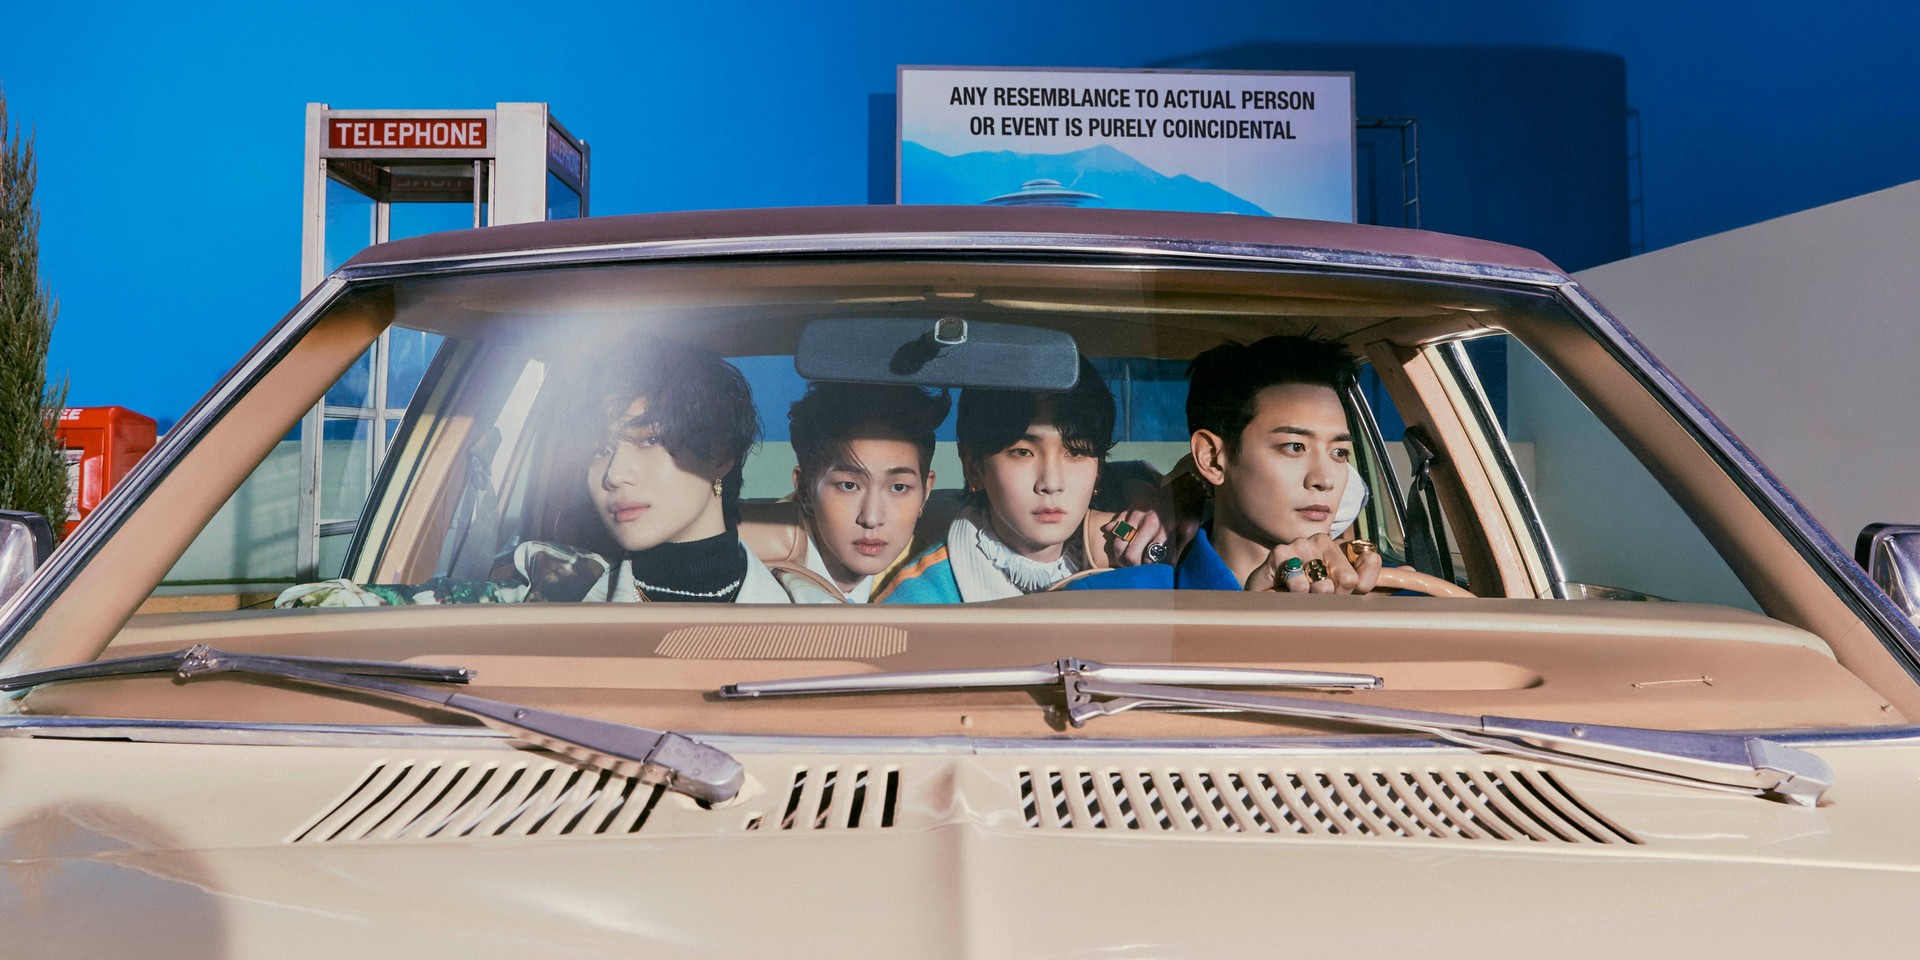 SHINee's new album Don't Call Me is coming this February, here's what you need to know